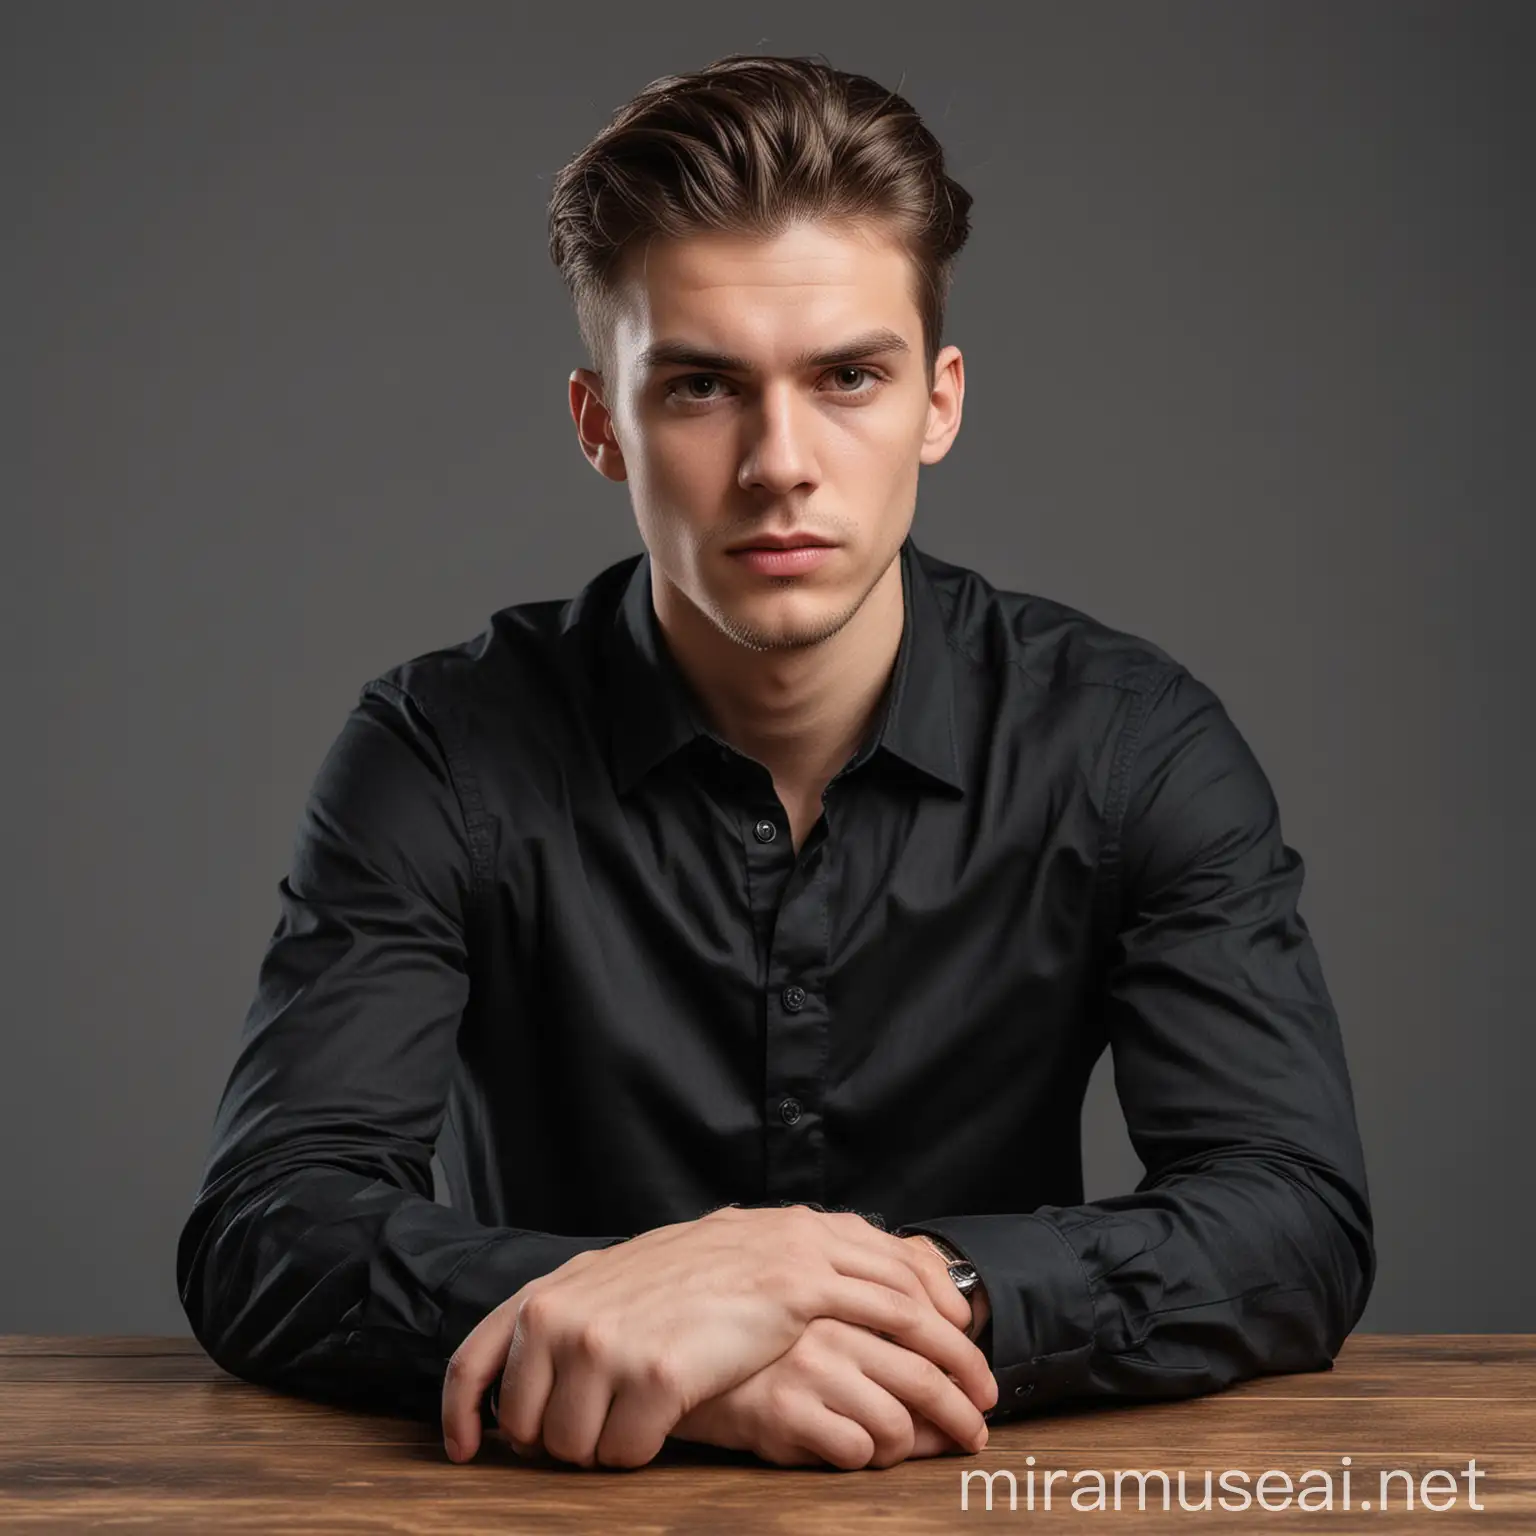 Young Man Sitting on Table in Stylish Black Pants and Shirt